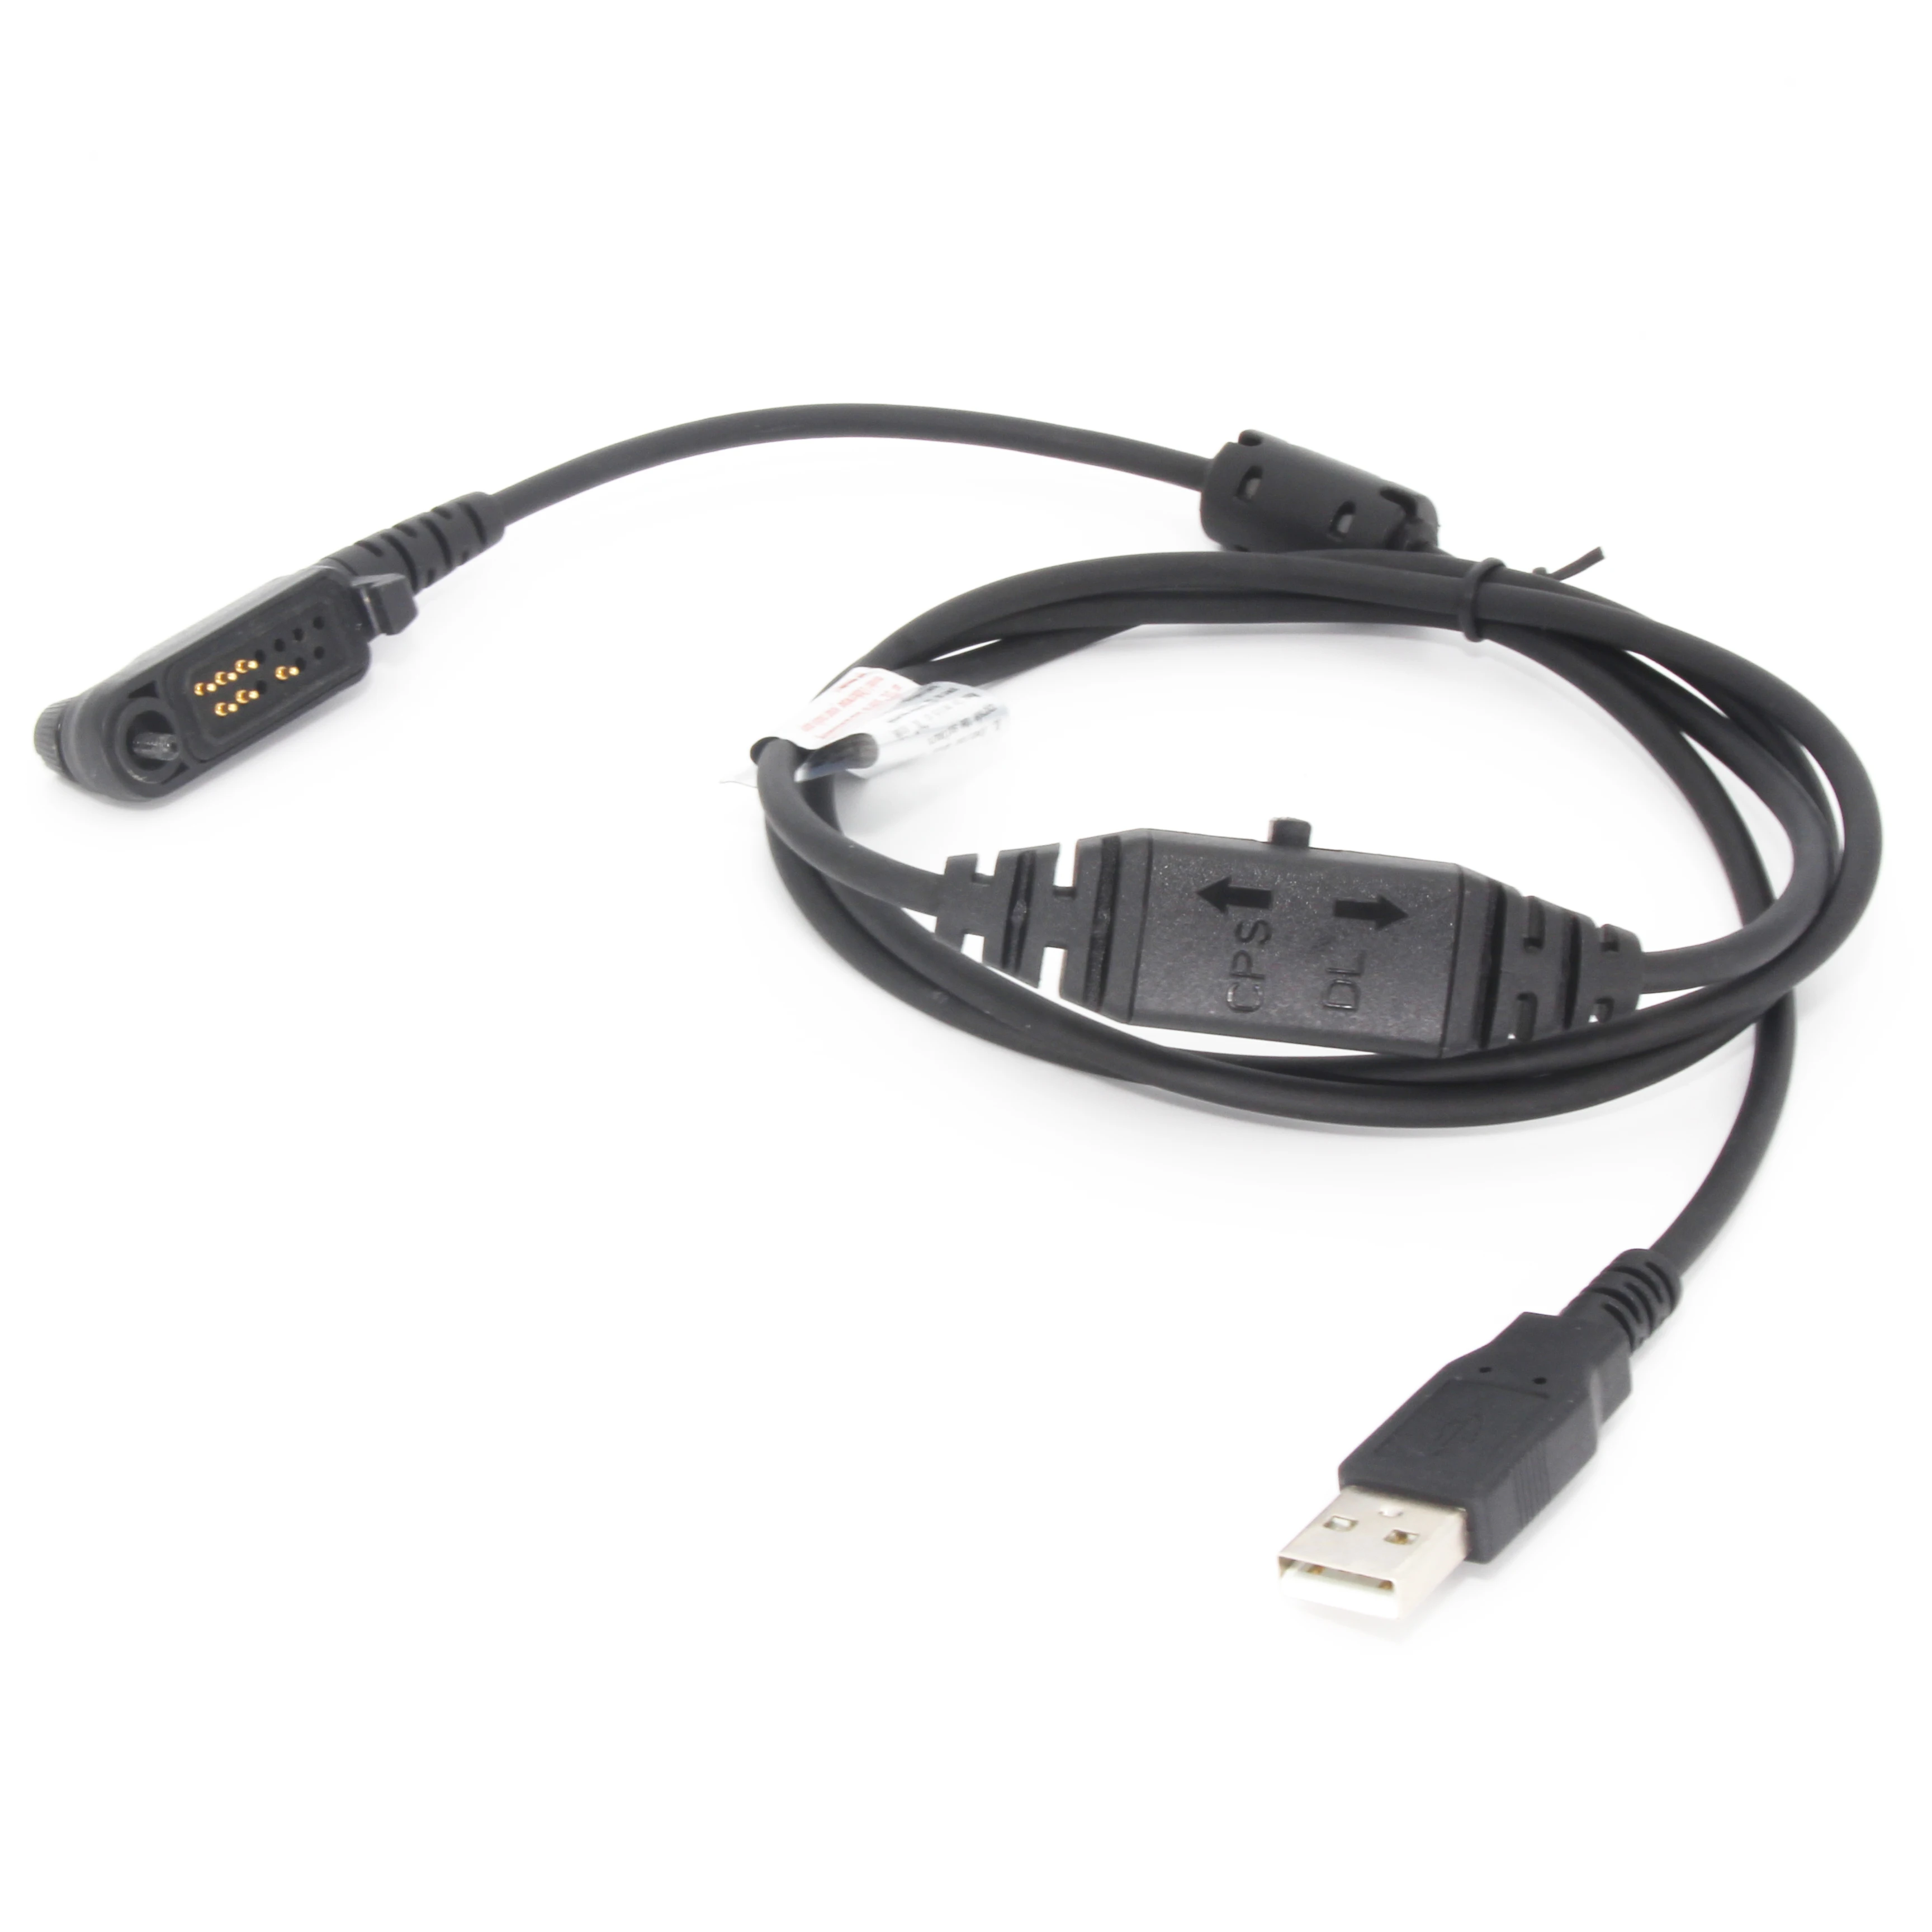 PC45 USB Programming cable For Hytera PD600 PD602 PD606 PD660 PD680 X1e X1p etc walkie talkie